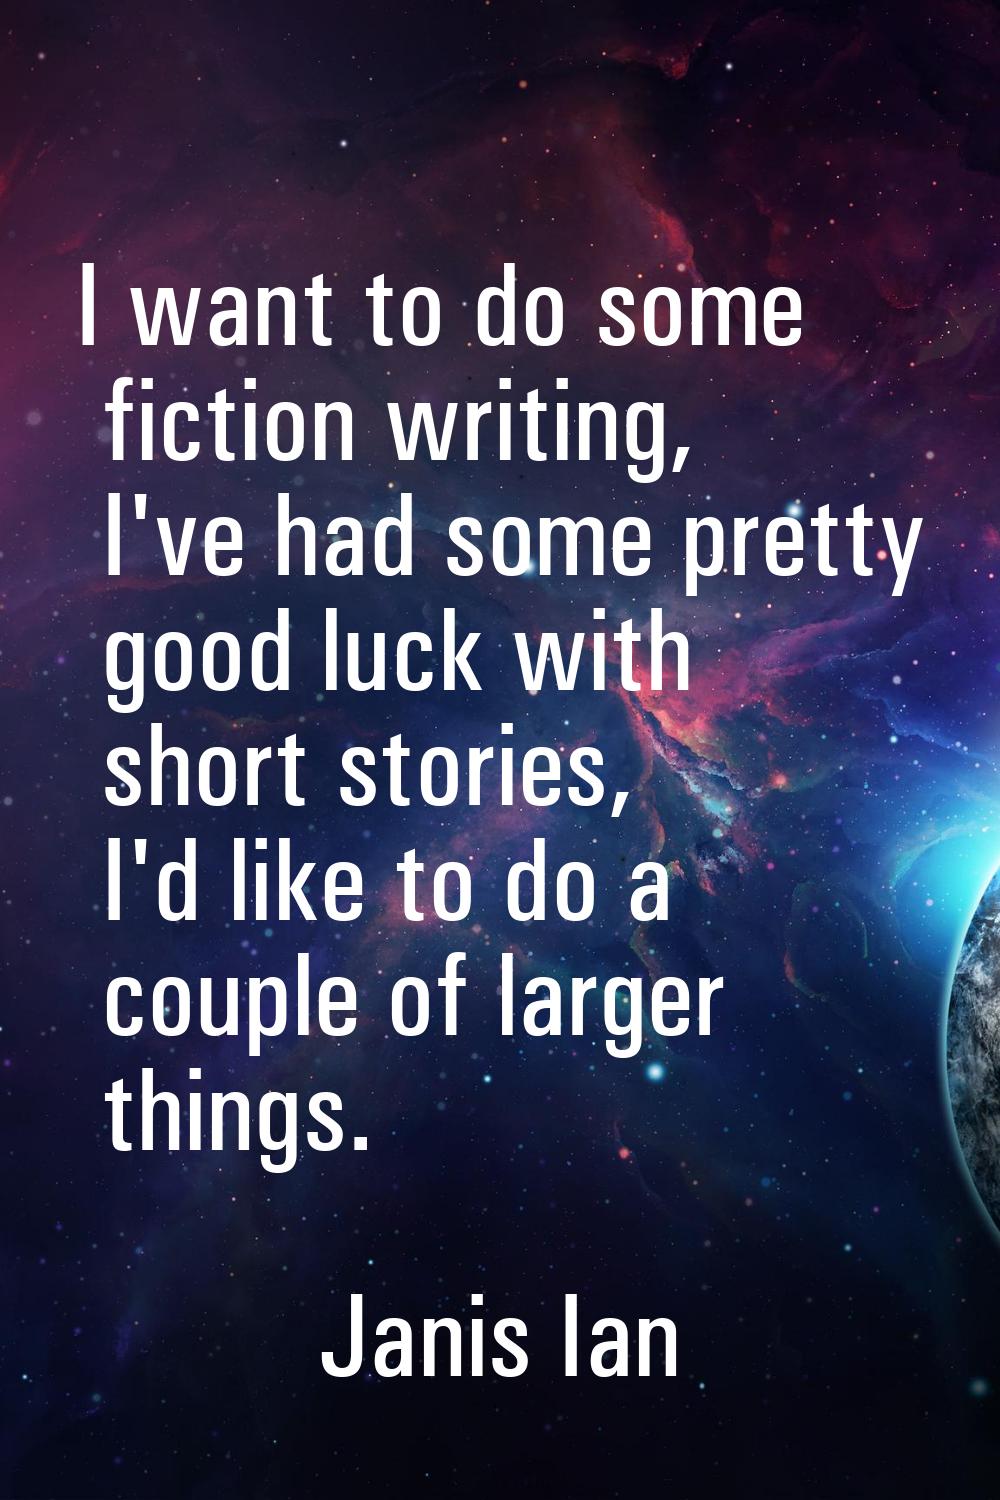 I want to do some fiction writing, I've had some pretty good luck with short stories, I'd like to d